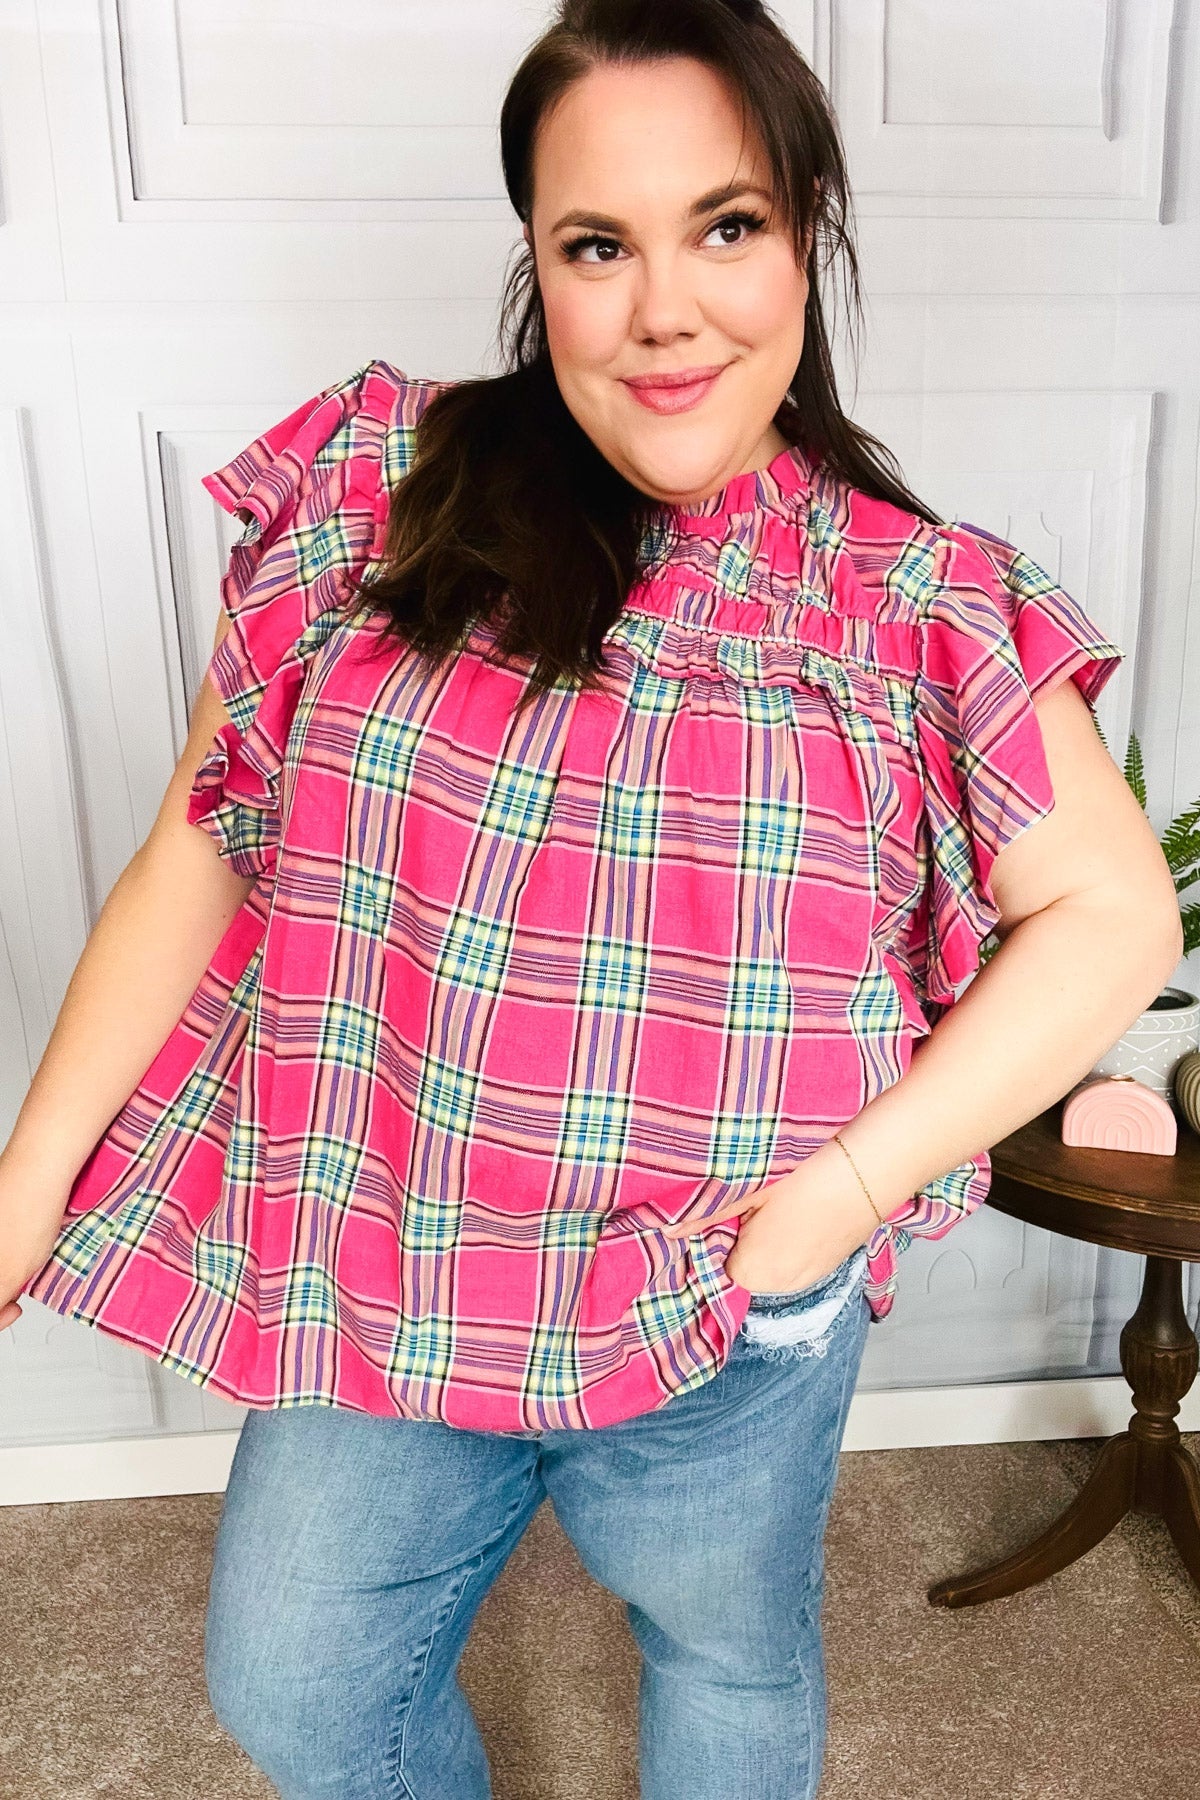 Live For Today Top in Fuchsia Plaid